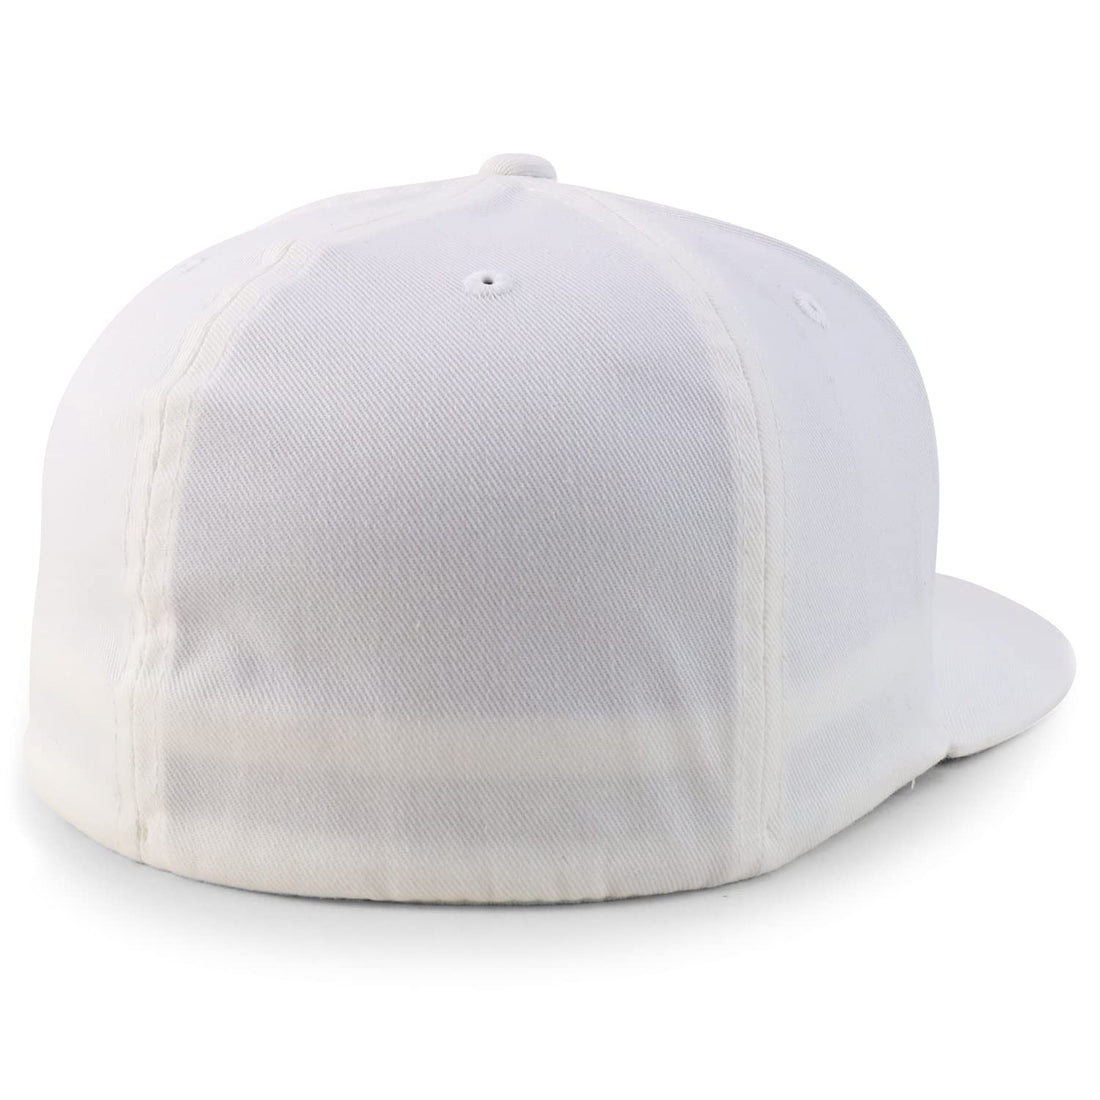 Trendy Apparel Shop 6 Panel Structured Blank Flatbill Fitted Closure Flexfit Cap